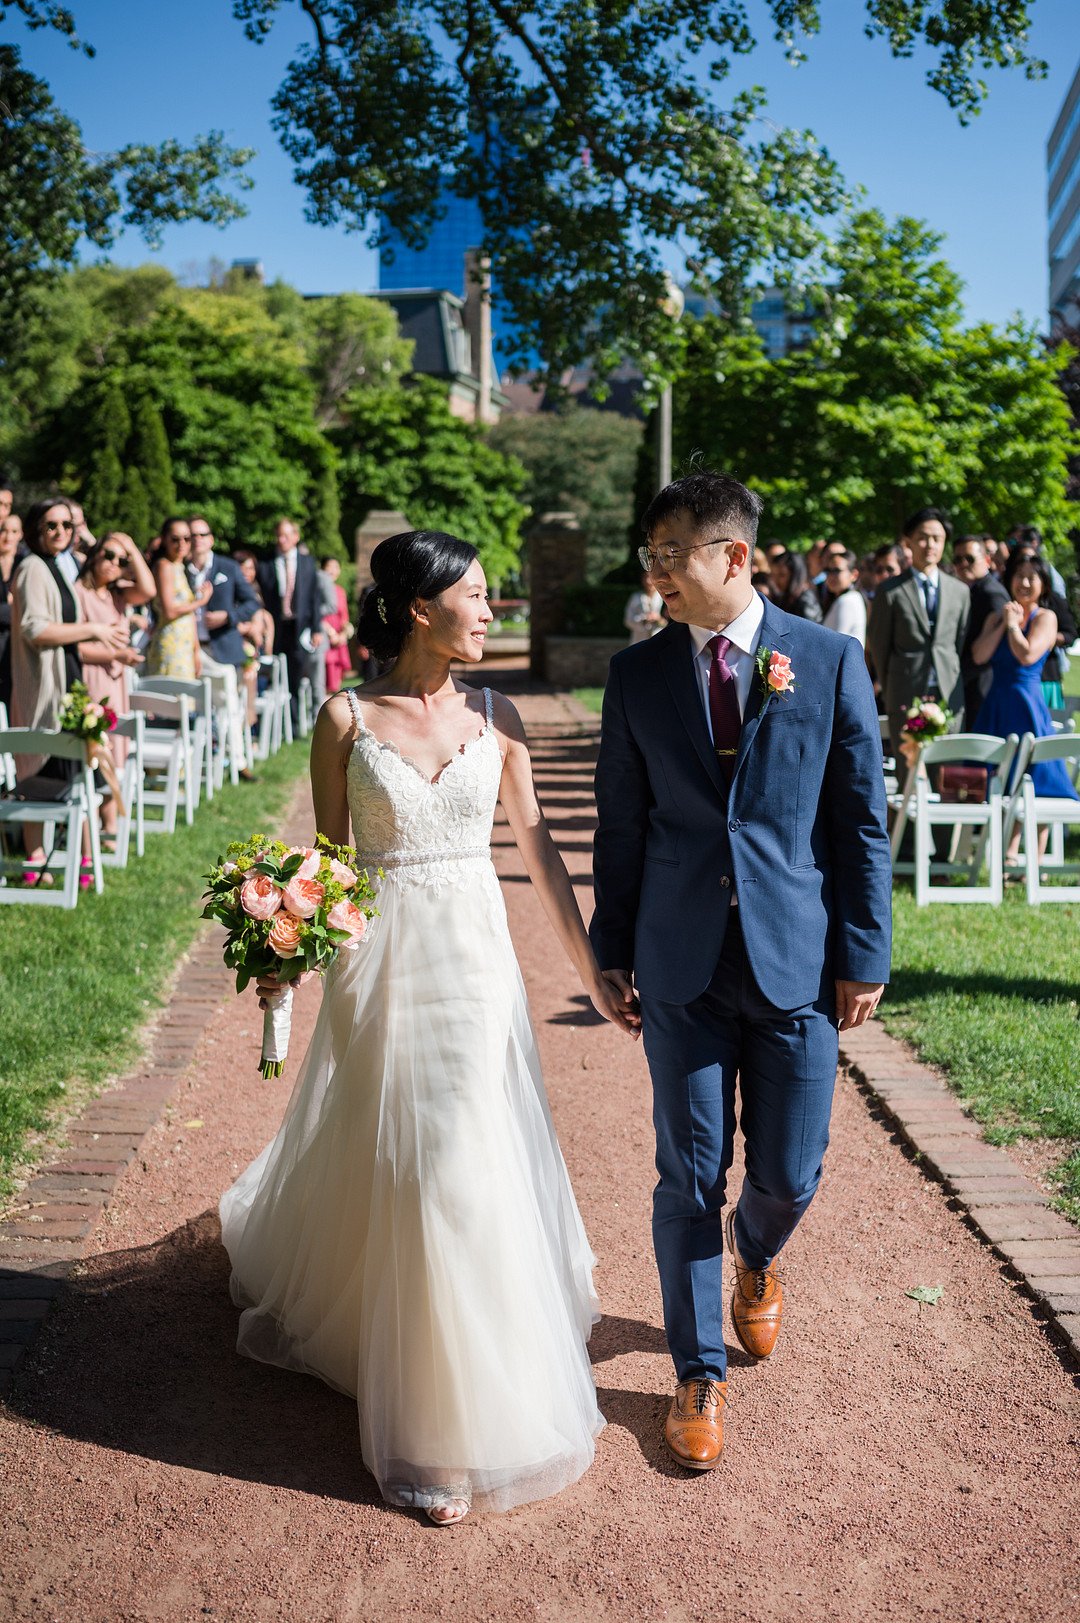 Chan_Chan_Winterlyn Photography_GLESSNER HOUSE CHICAGO WEDDING-67_low.jpg